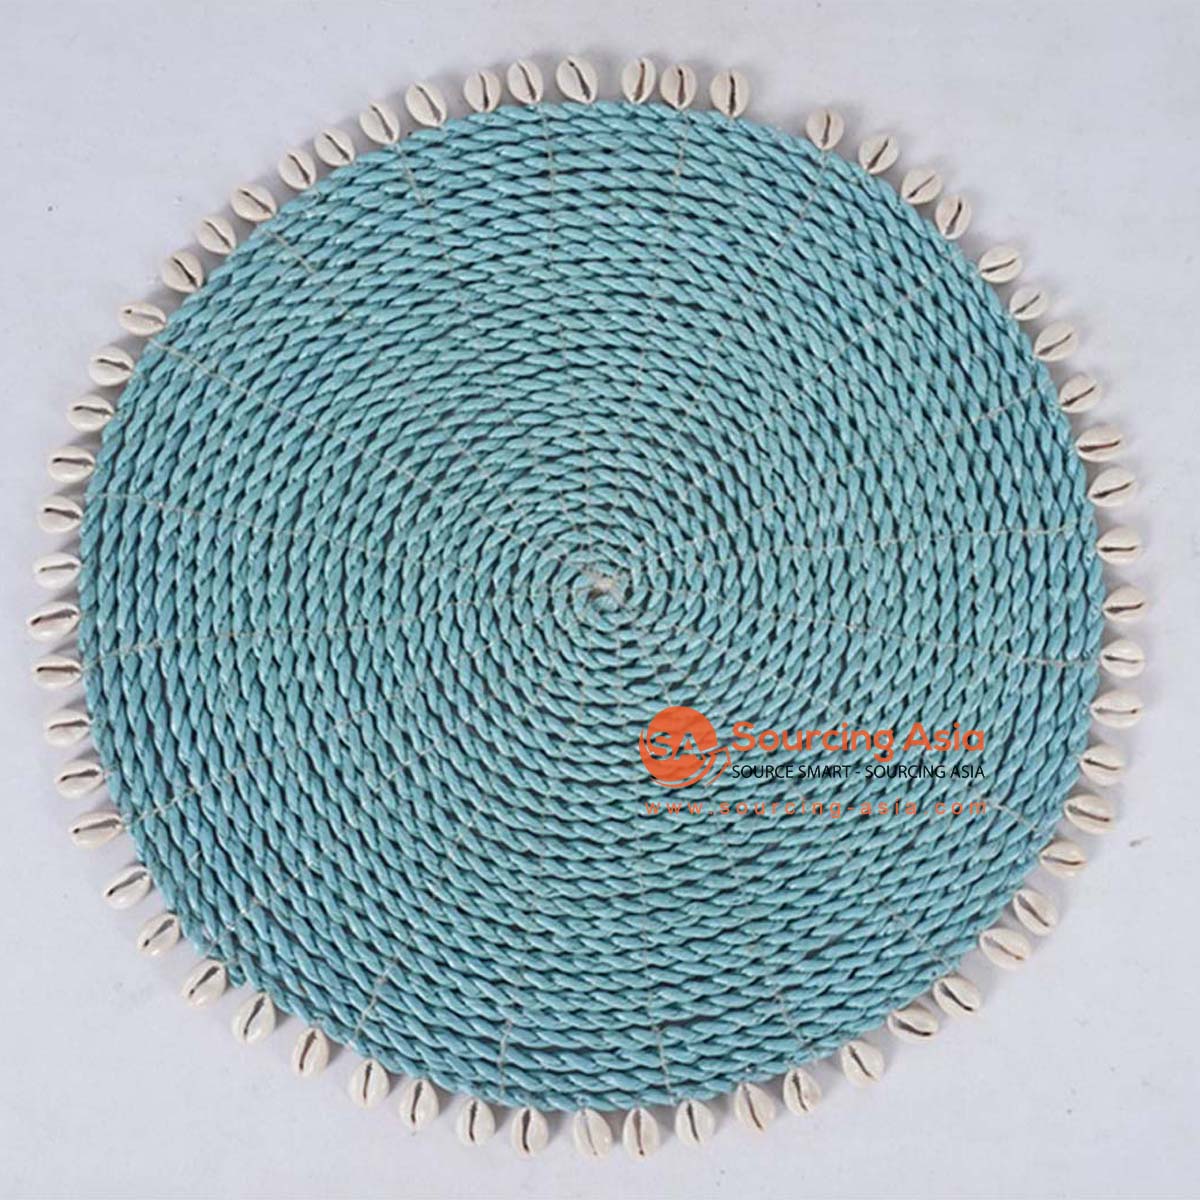 HBSC562-1 BLUE PLASTIC ROUND PLACEMAT WITH SHELL EDGE